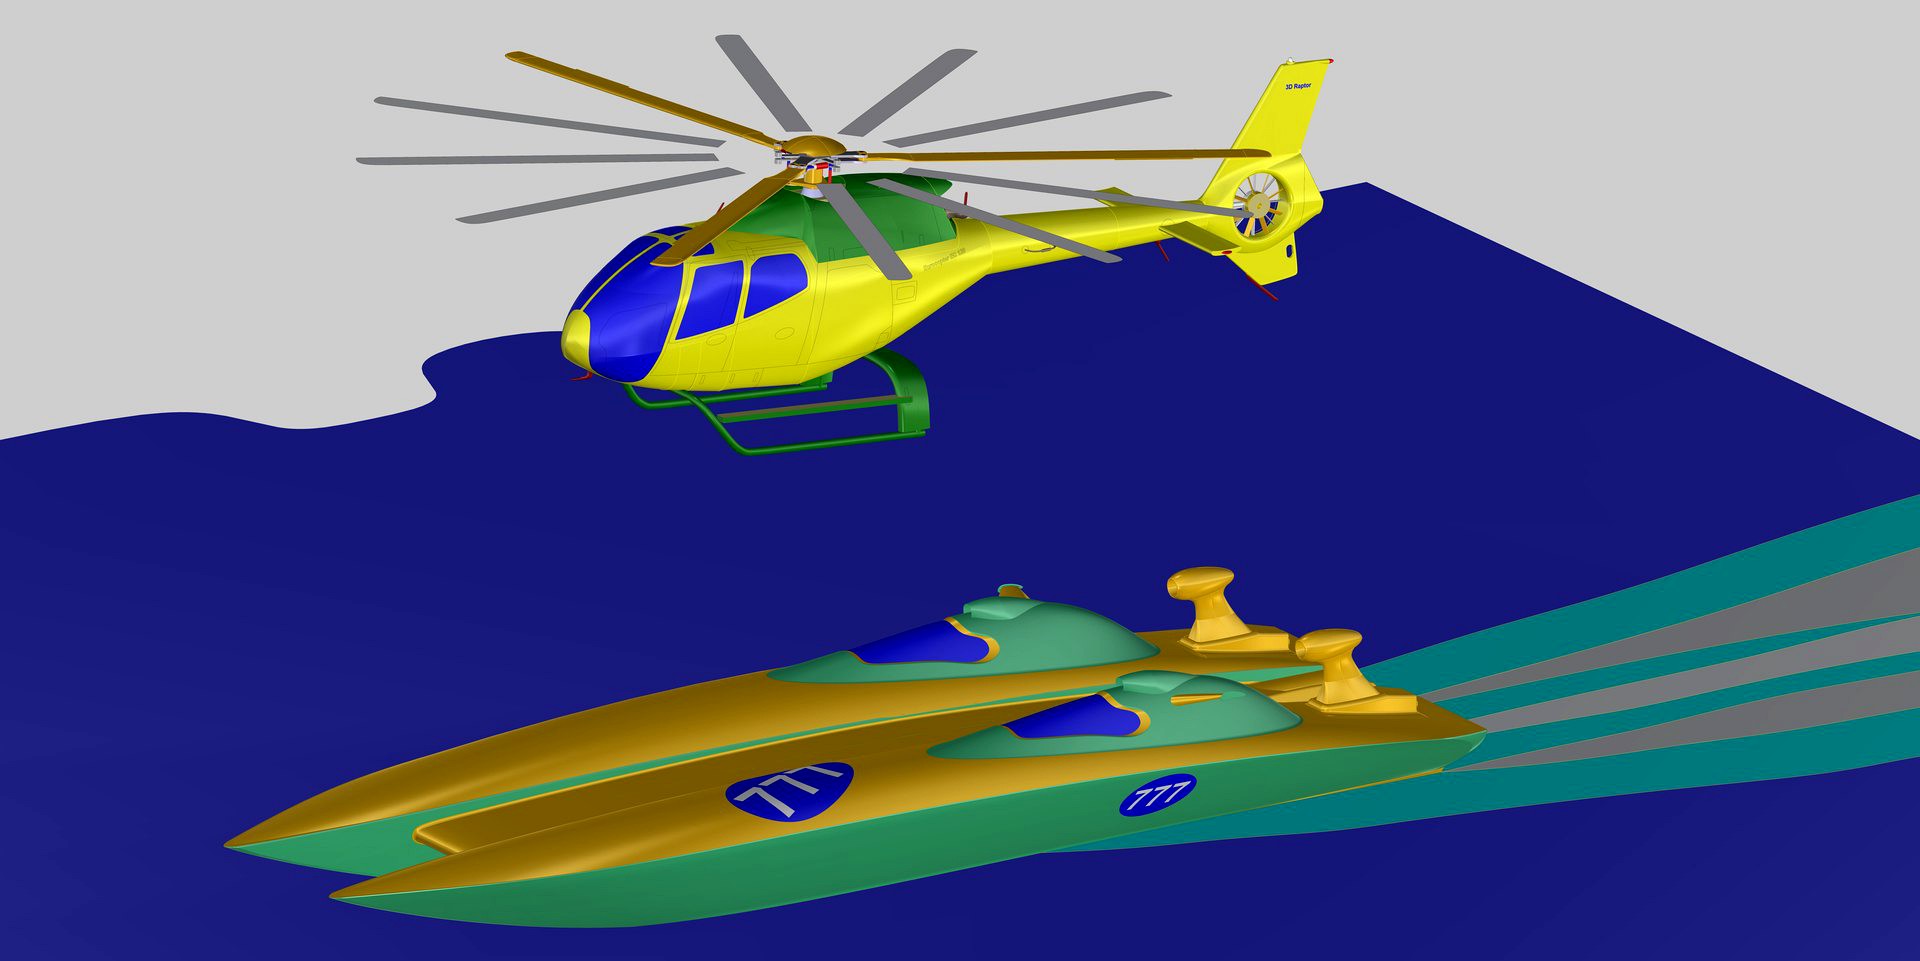 Eurocopter and Speedboat